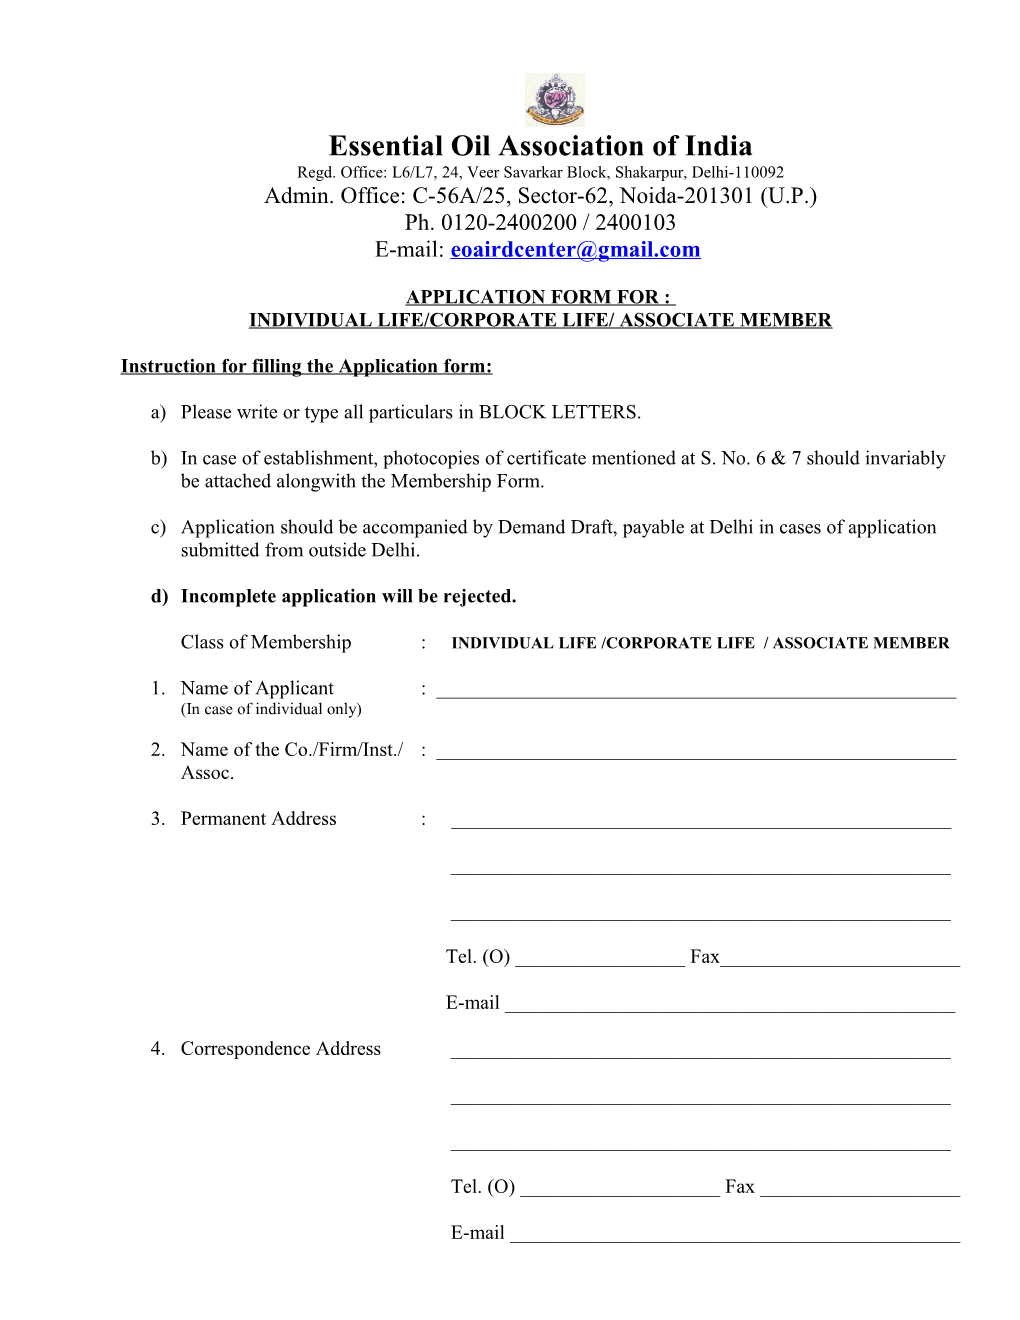 Application Form for Individual/Corporate Membership